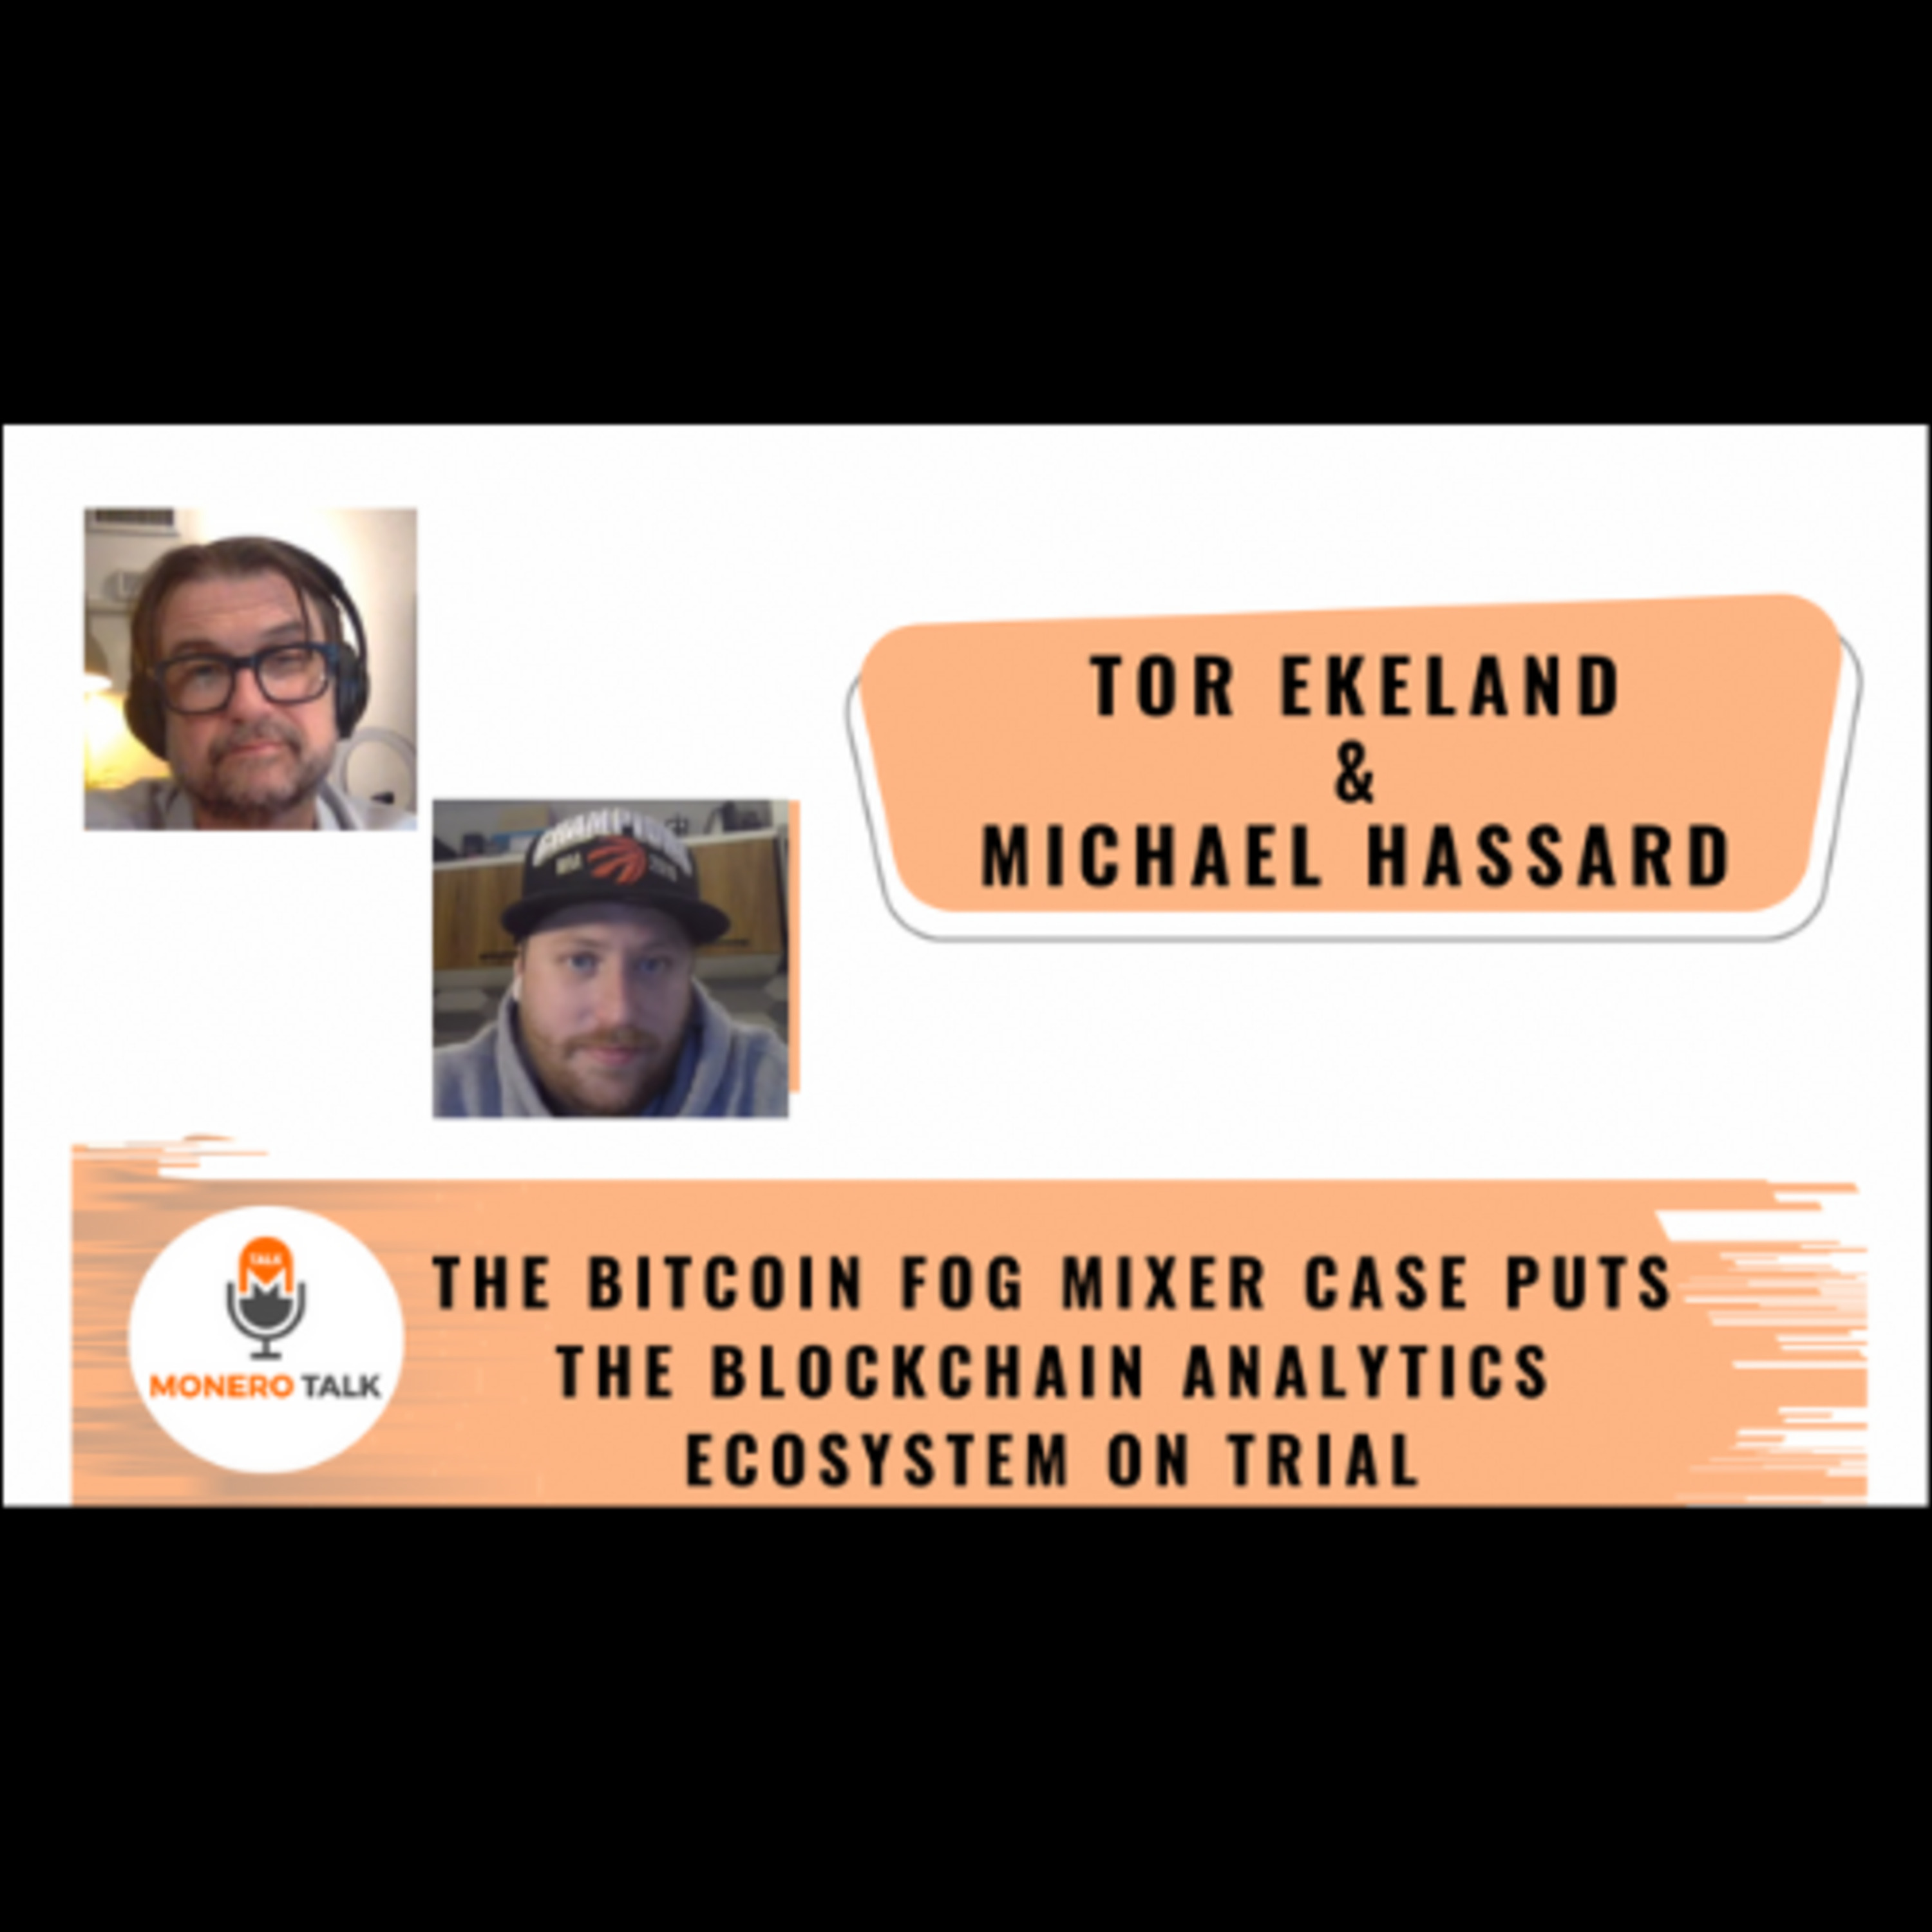 The Bitcoin Fog Mixer Case puts the blockchain analytics ecosystem on trial - Mike & Tor